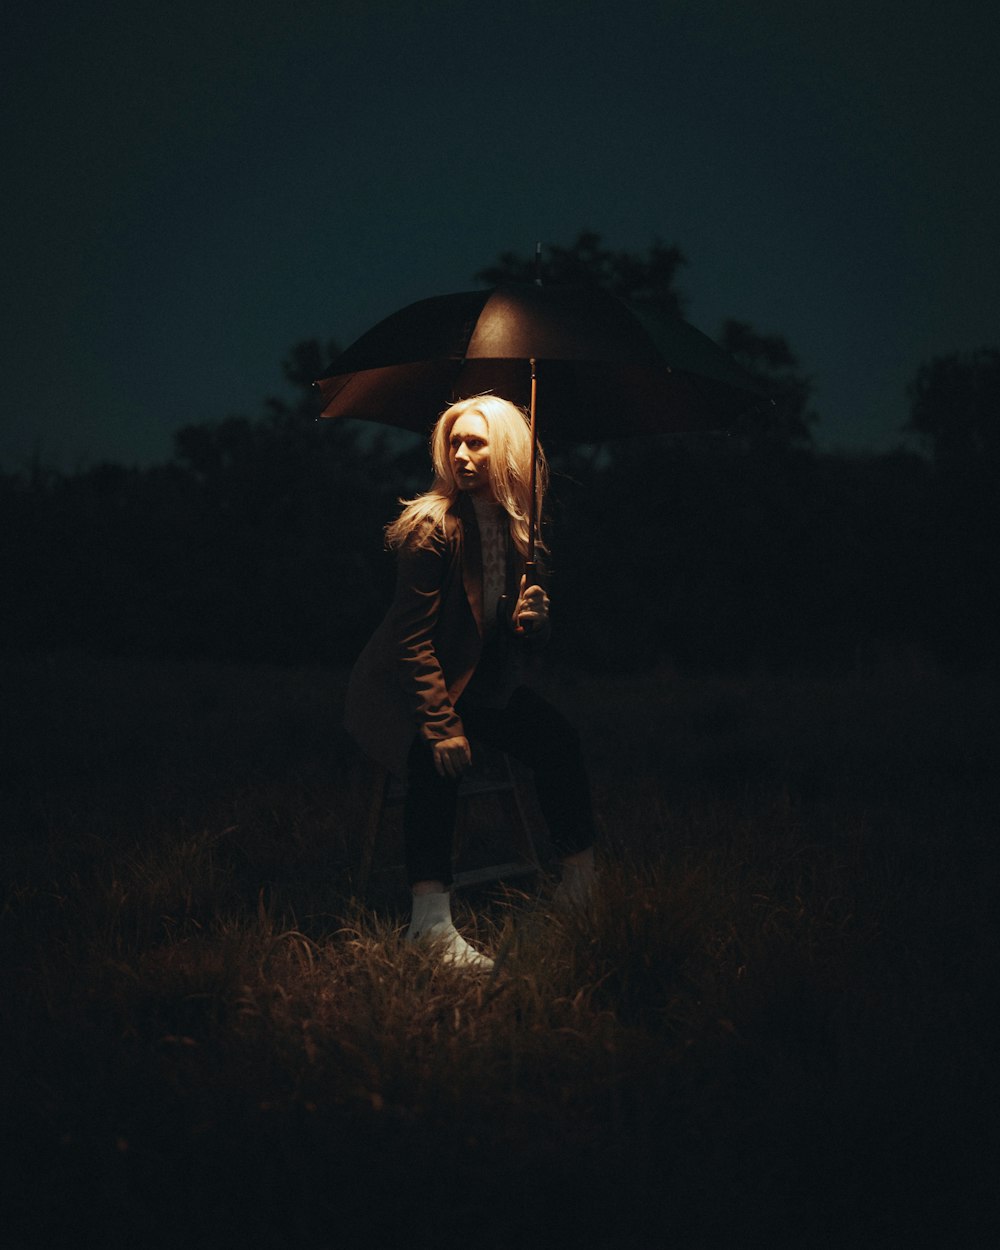 a woman standing in a field holding an umbrella